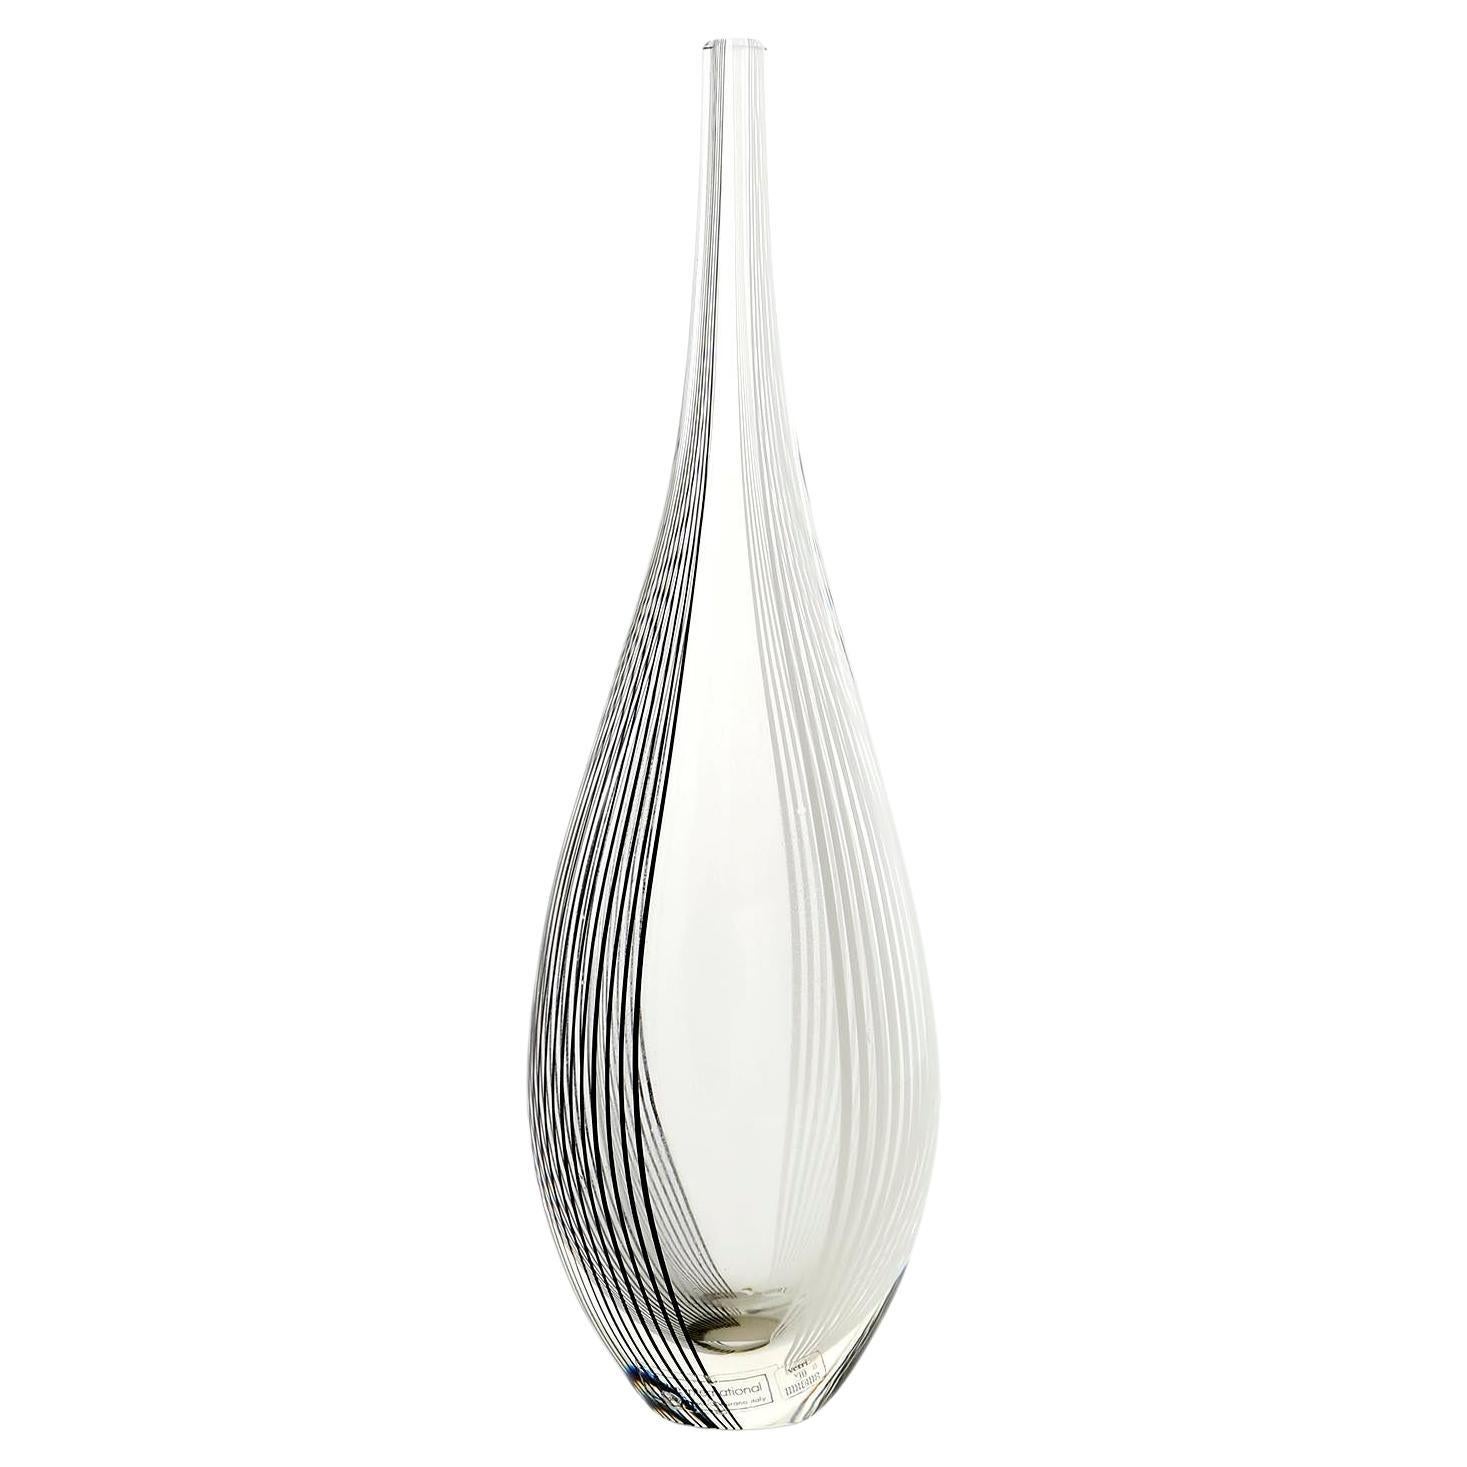 Vase Lino Tagliapietra for Effetre Italy, Black White Stripped Clear Glass, 1987 For Sale